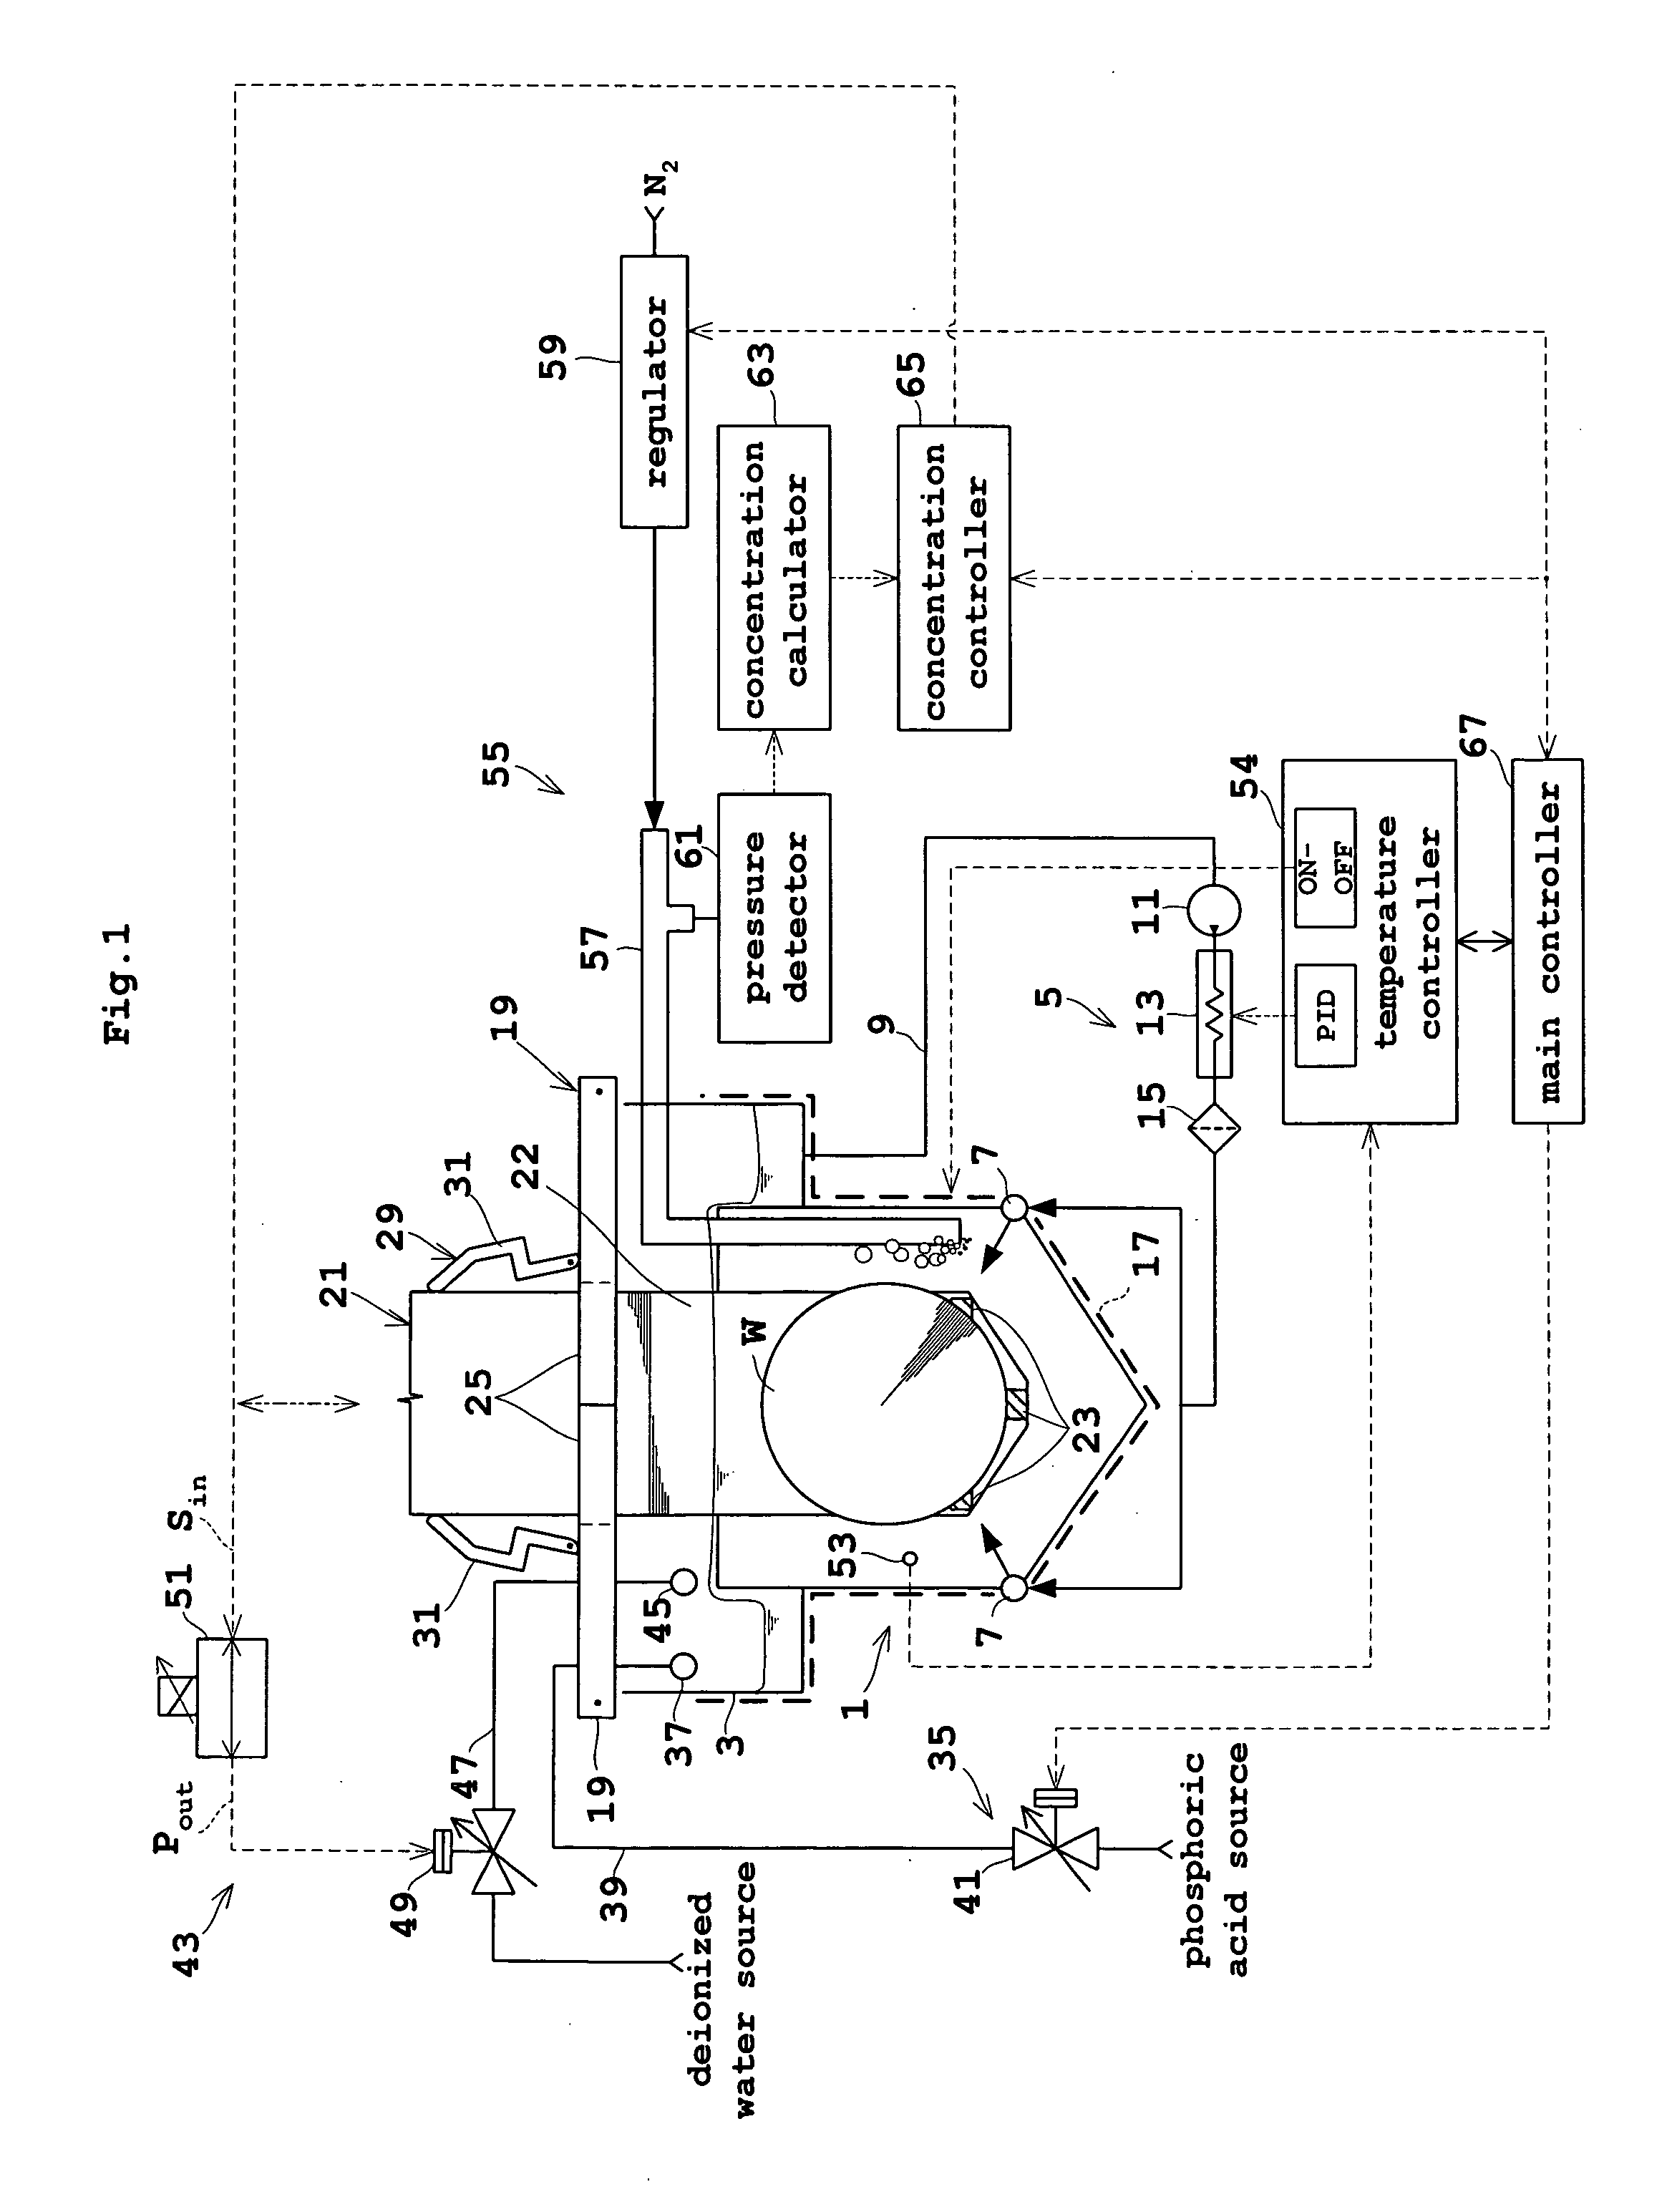 Substrate treating apparatus